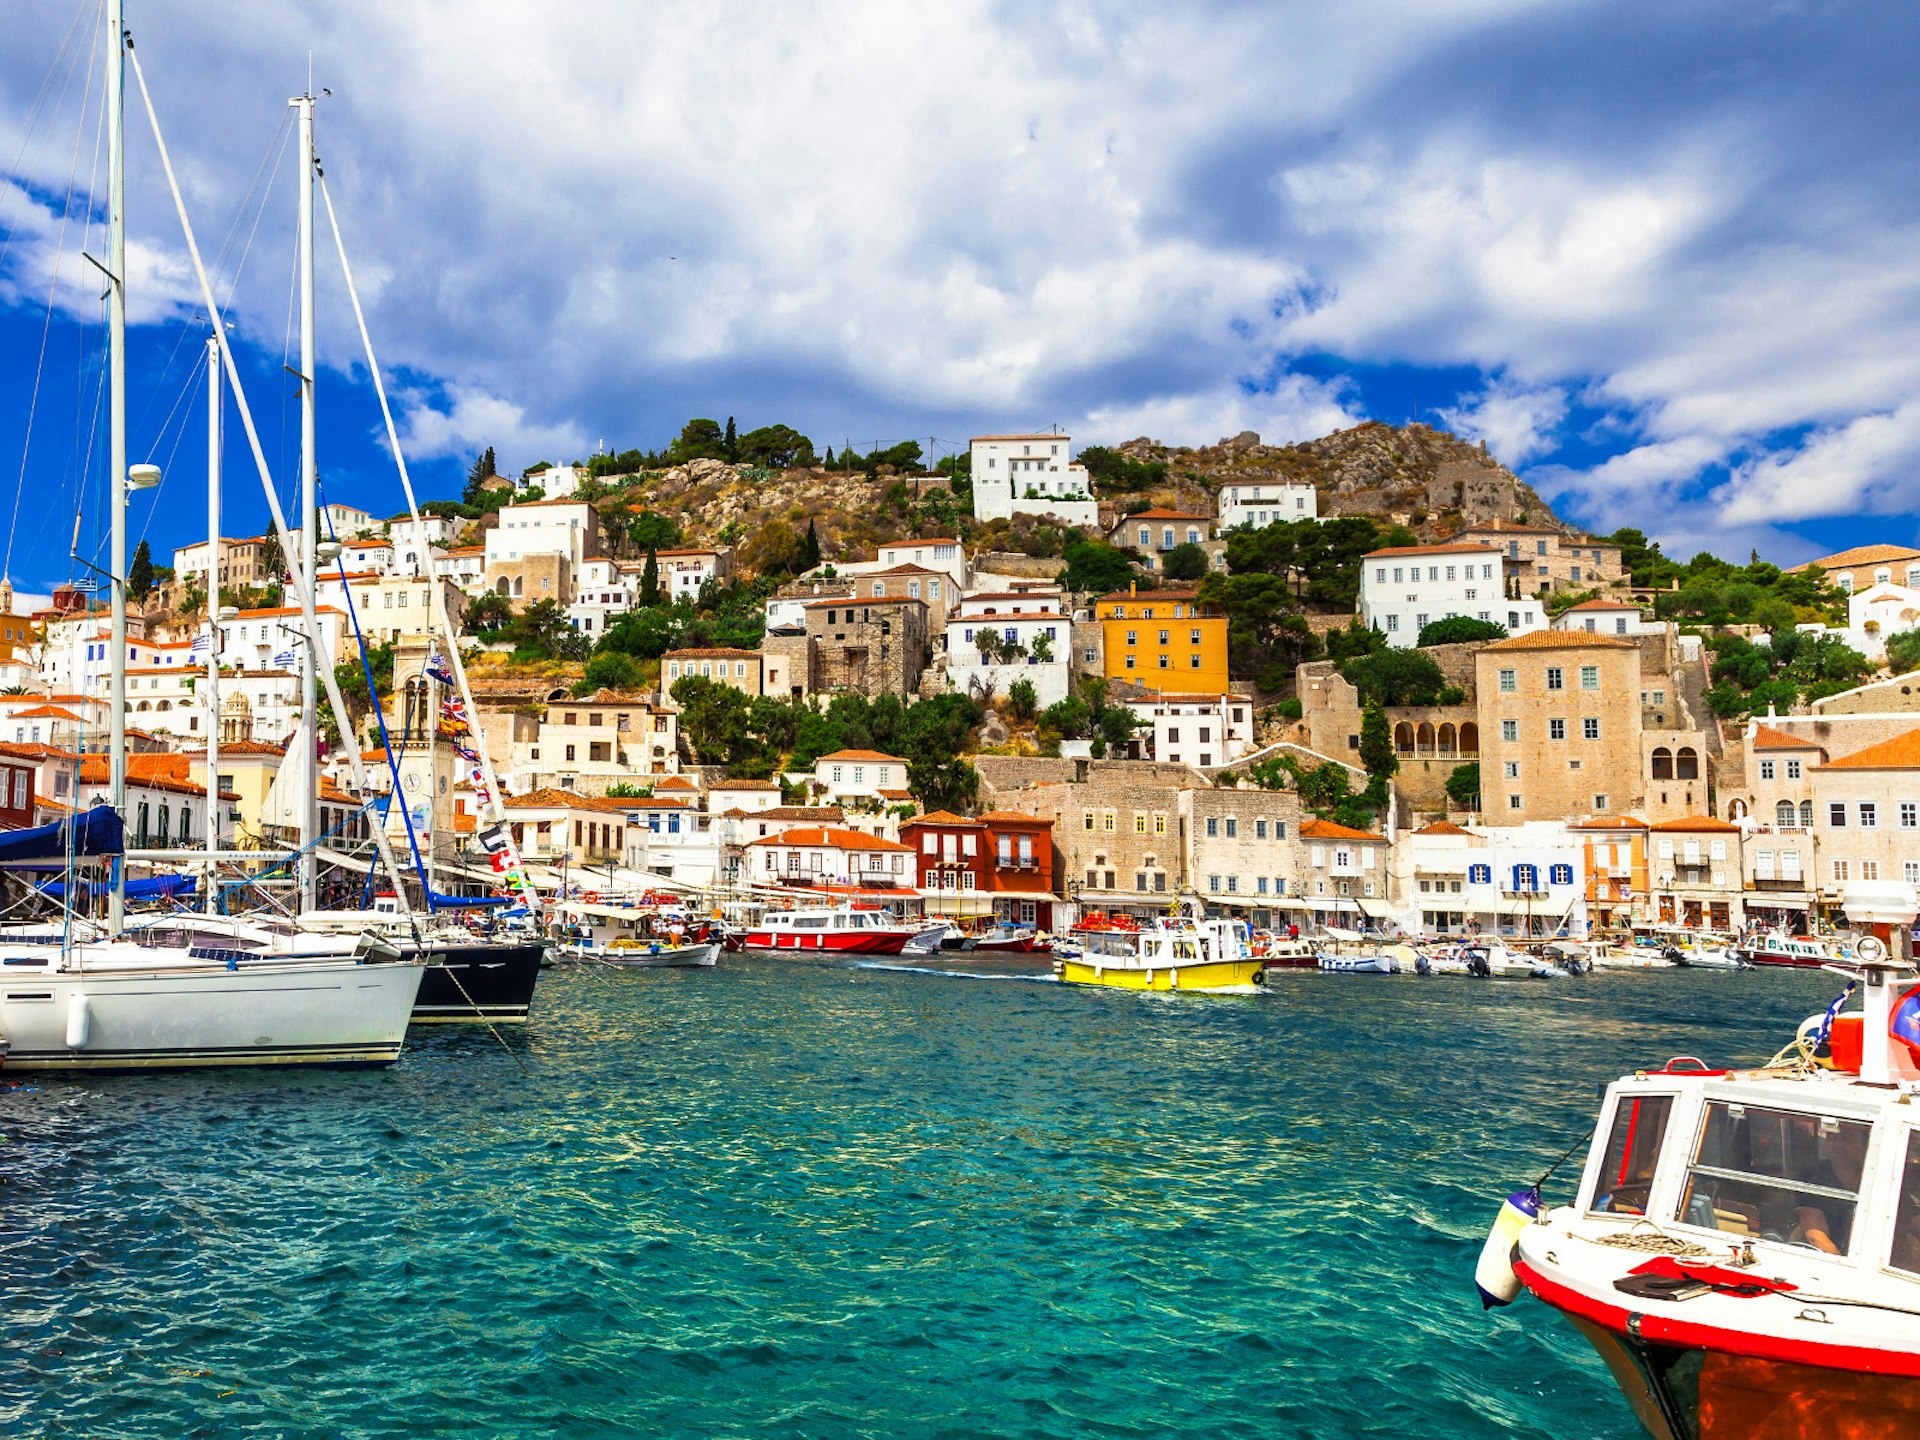 Fishing boats in the harbour at Hydra, with the town's houses huddled on a hillside behind them.